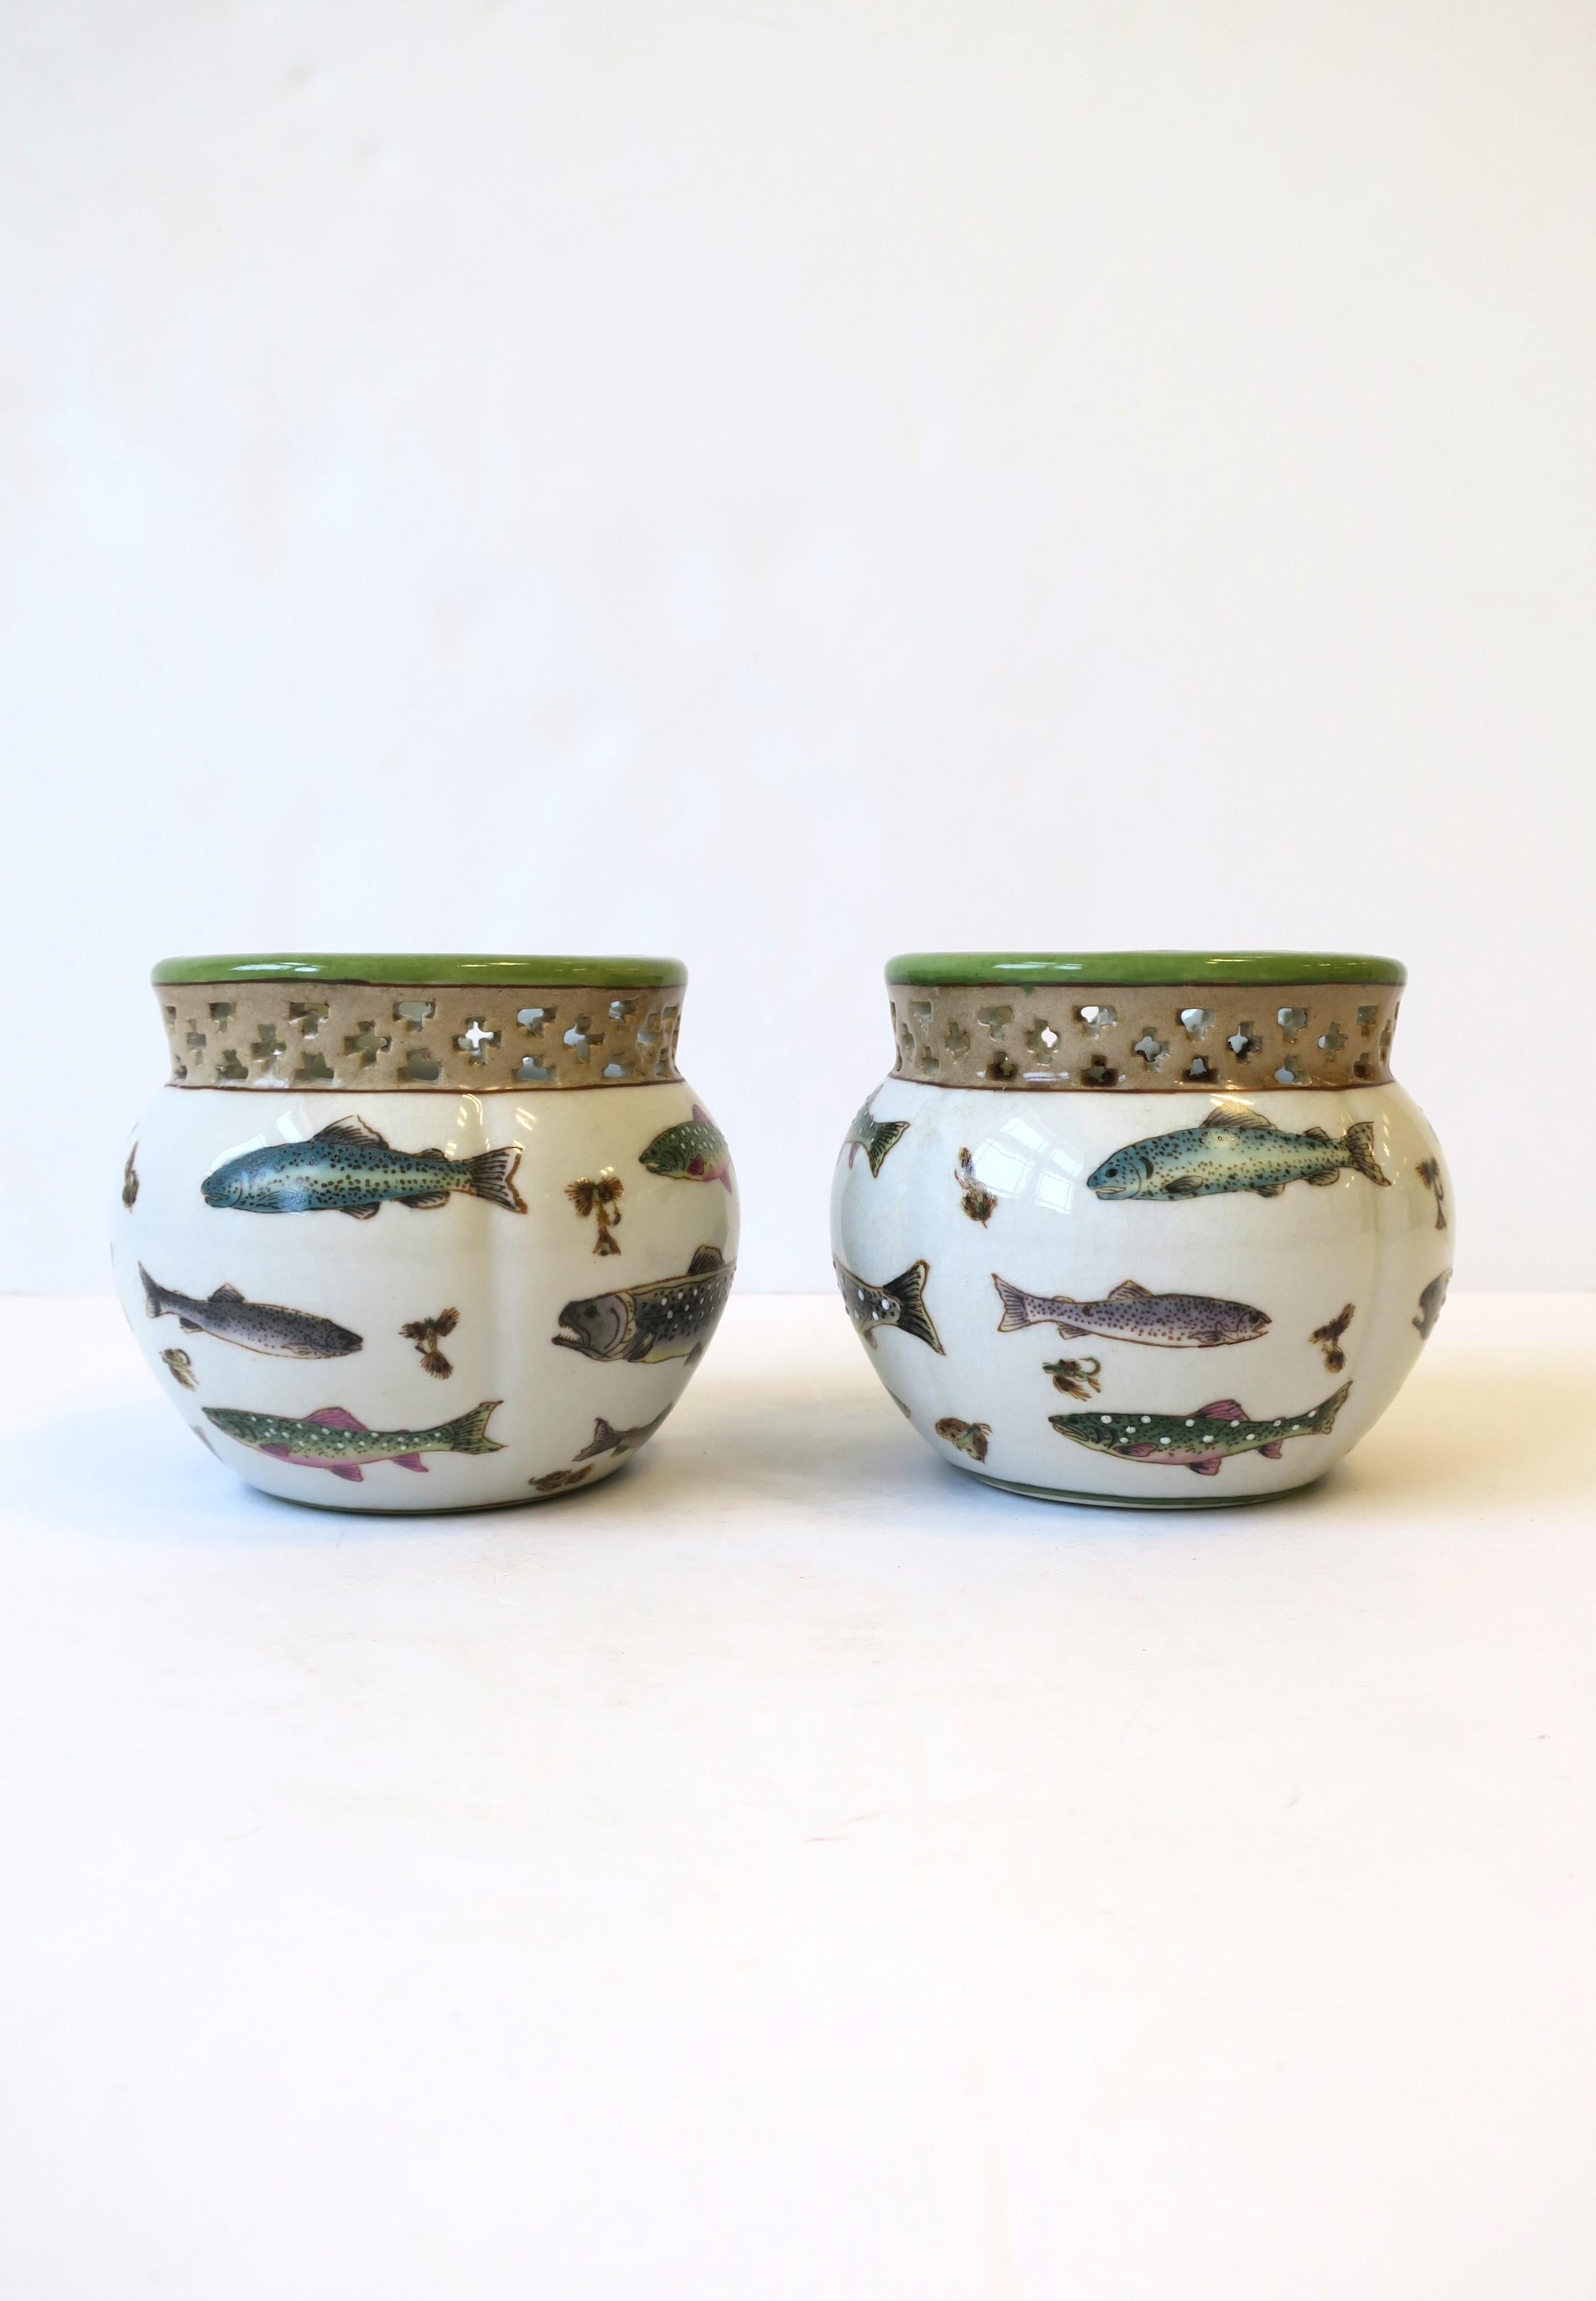 20th Century Fish and Lure Plant or Flower Pot Panters Ceramic Cachepots, Pair